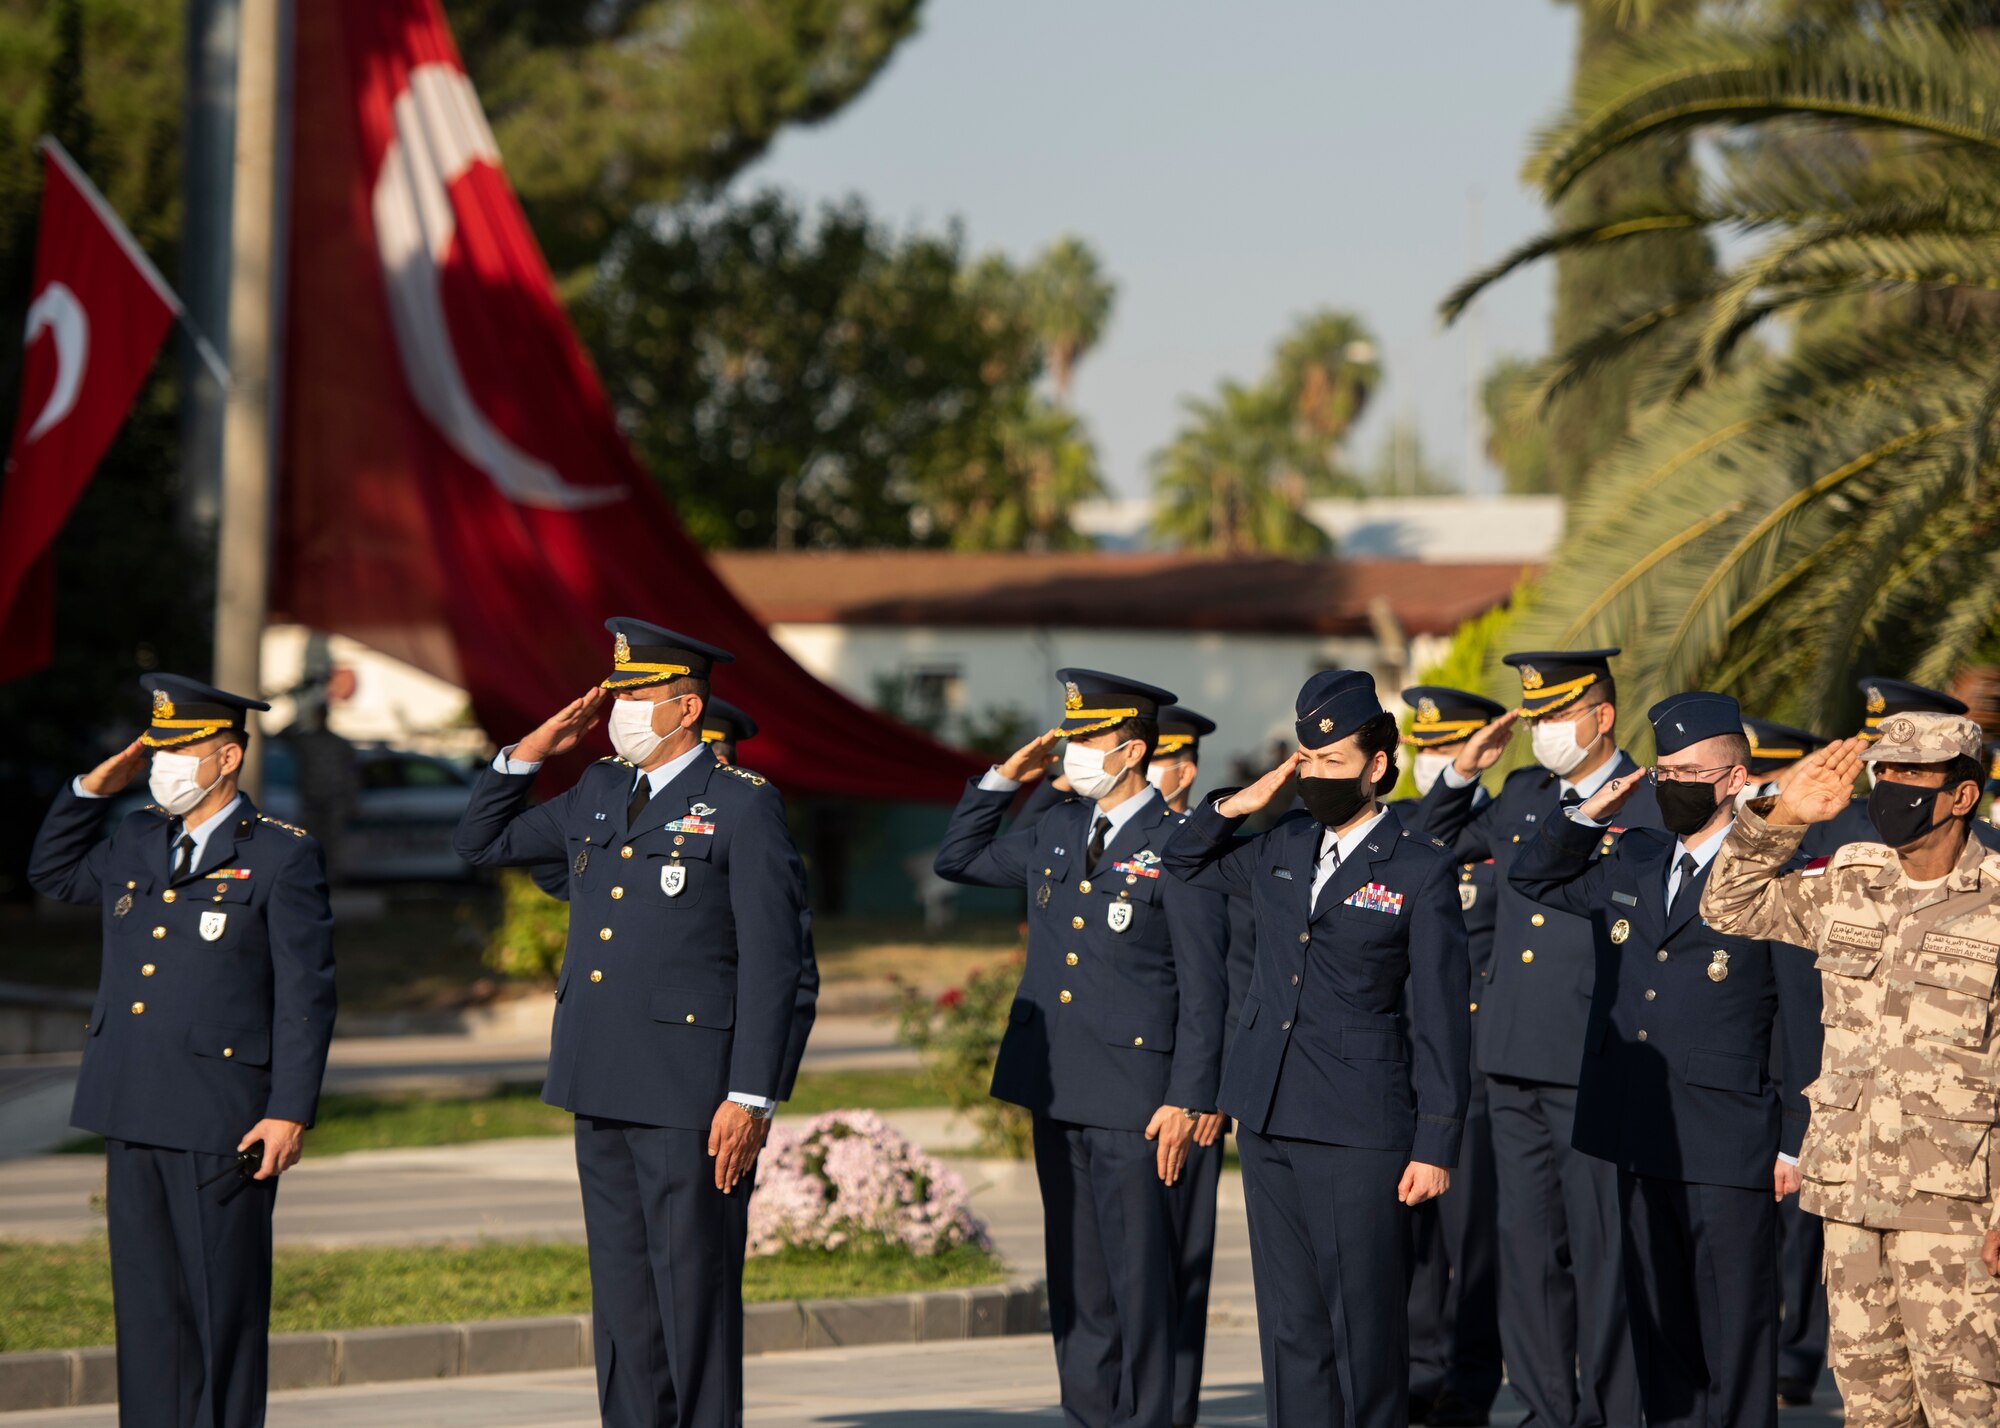 U.S. Air Force and Turkish Air Force personnel render a salute during a ceremony.